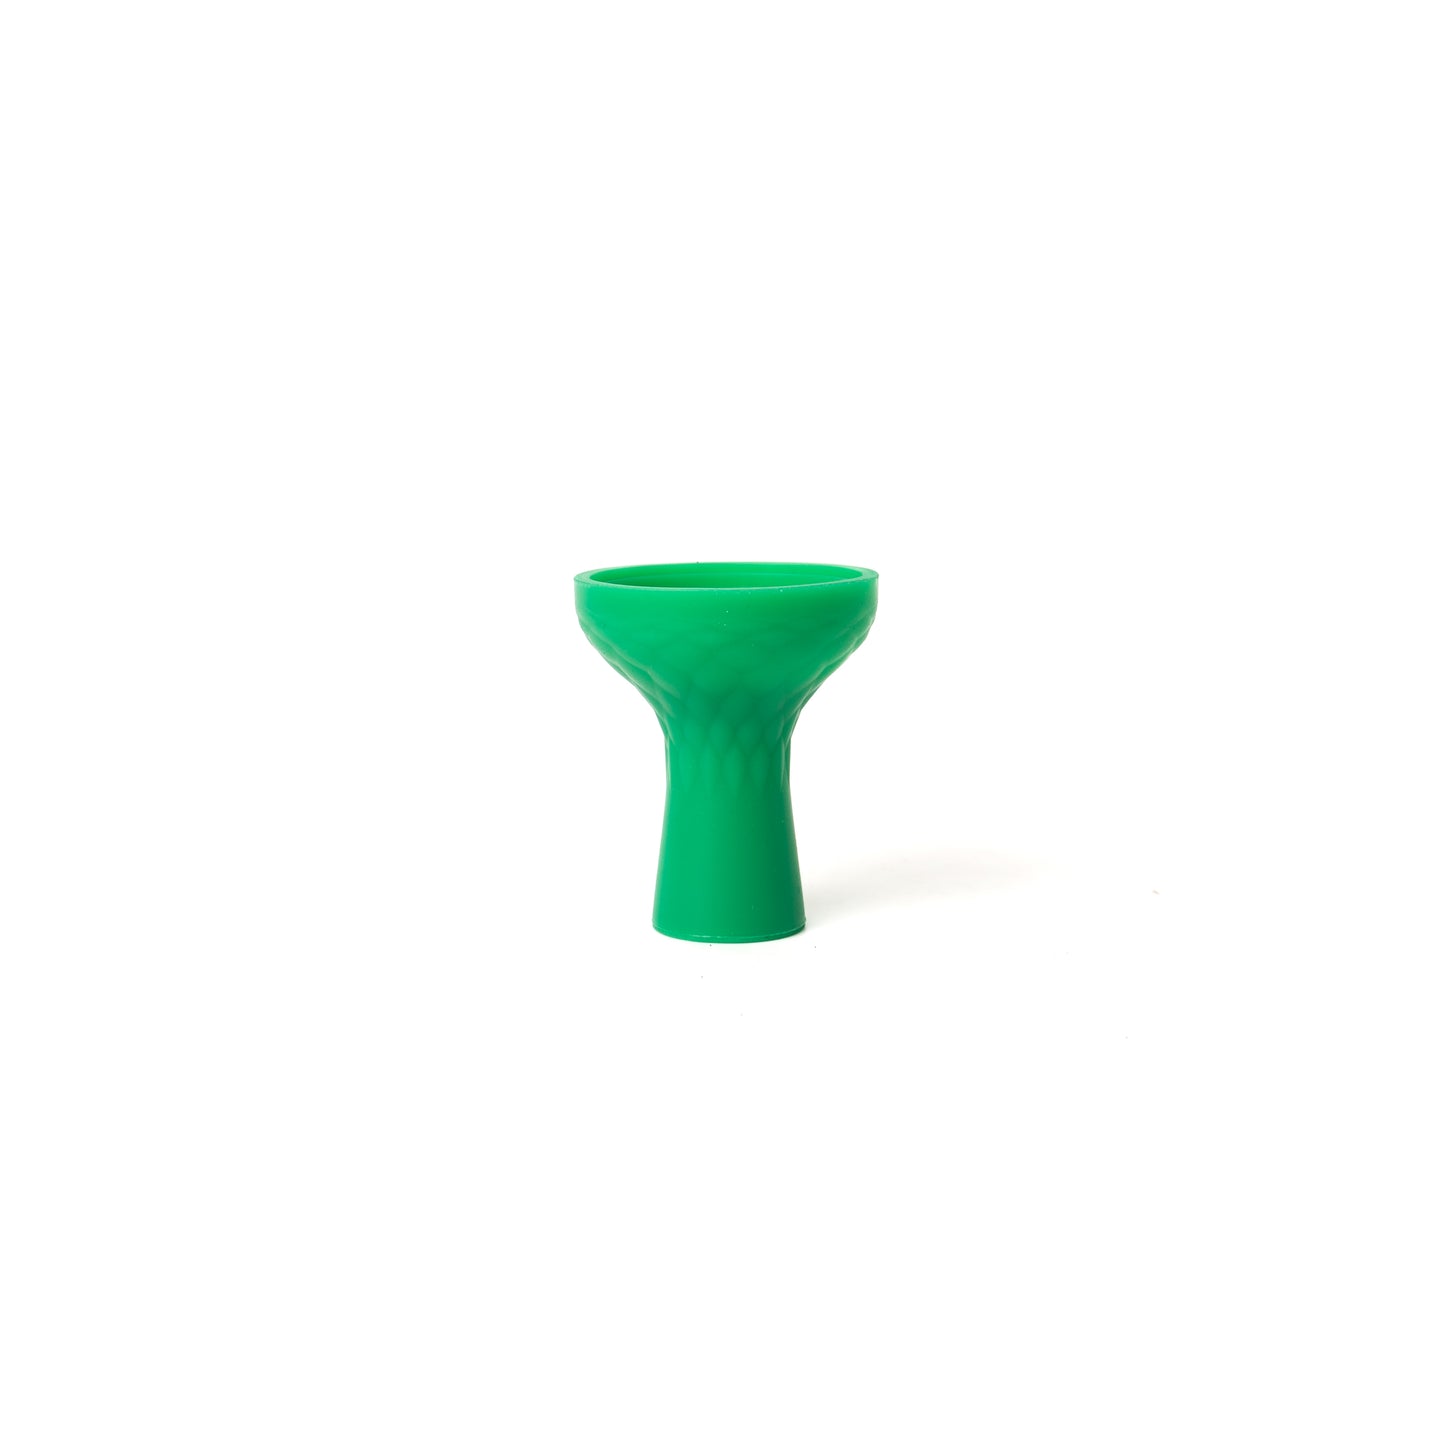 Unbreakable Silicone Chillum for Hookah - Green